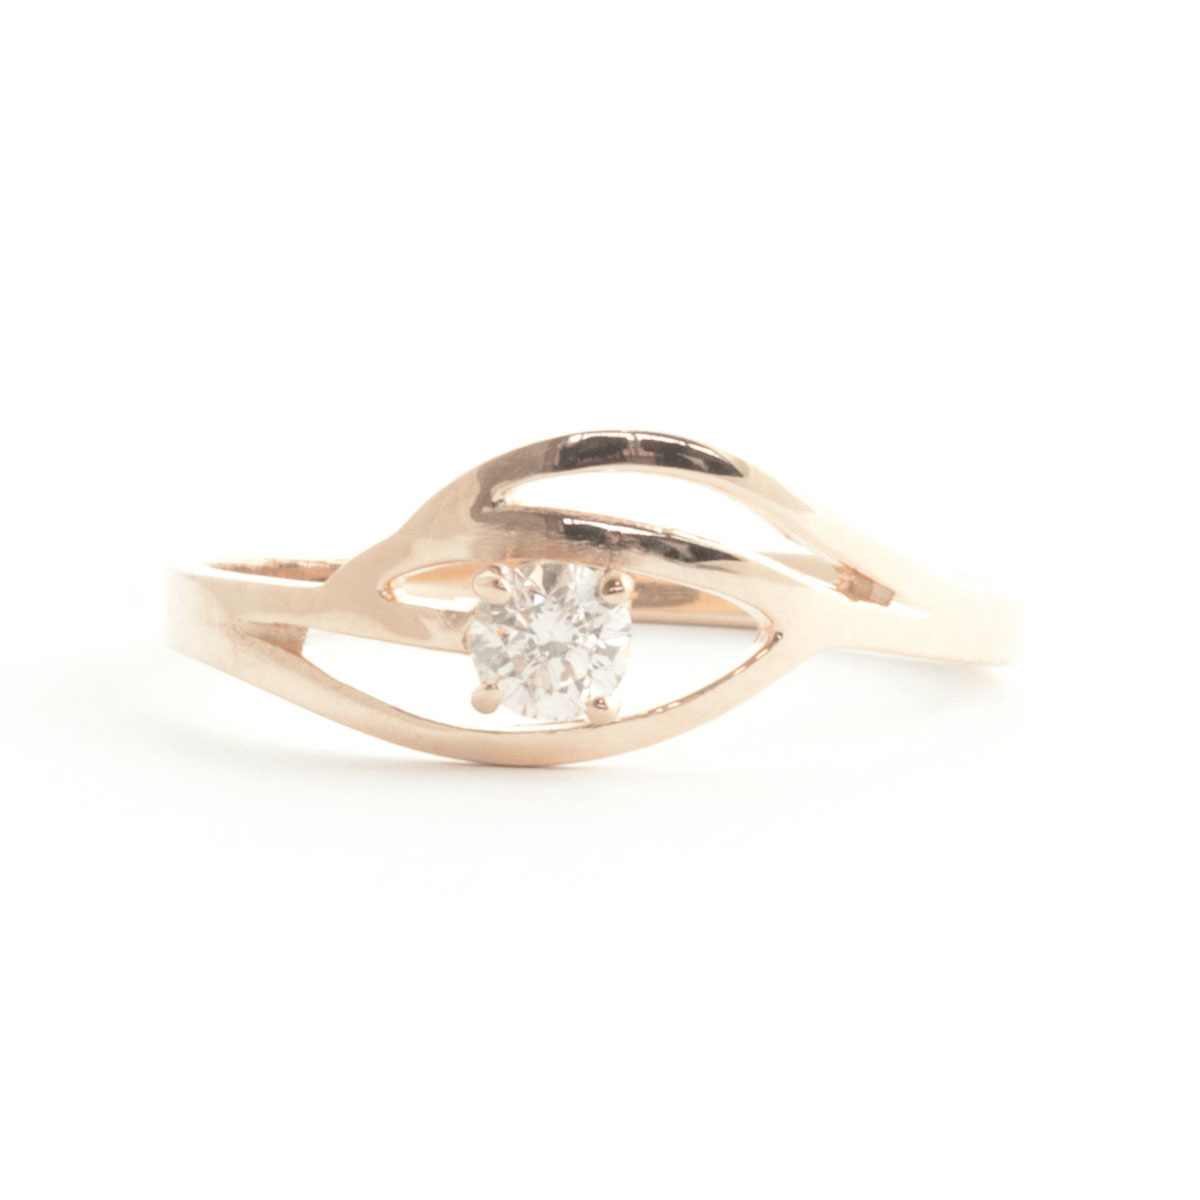 Round Cut Diamond Ring 0.15 ct in 9ct Rose Gold